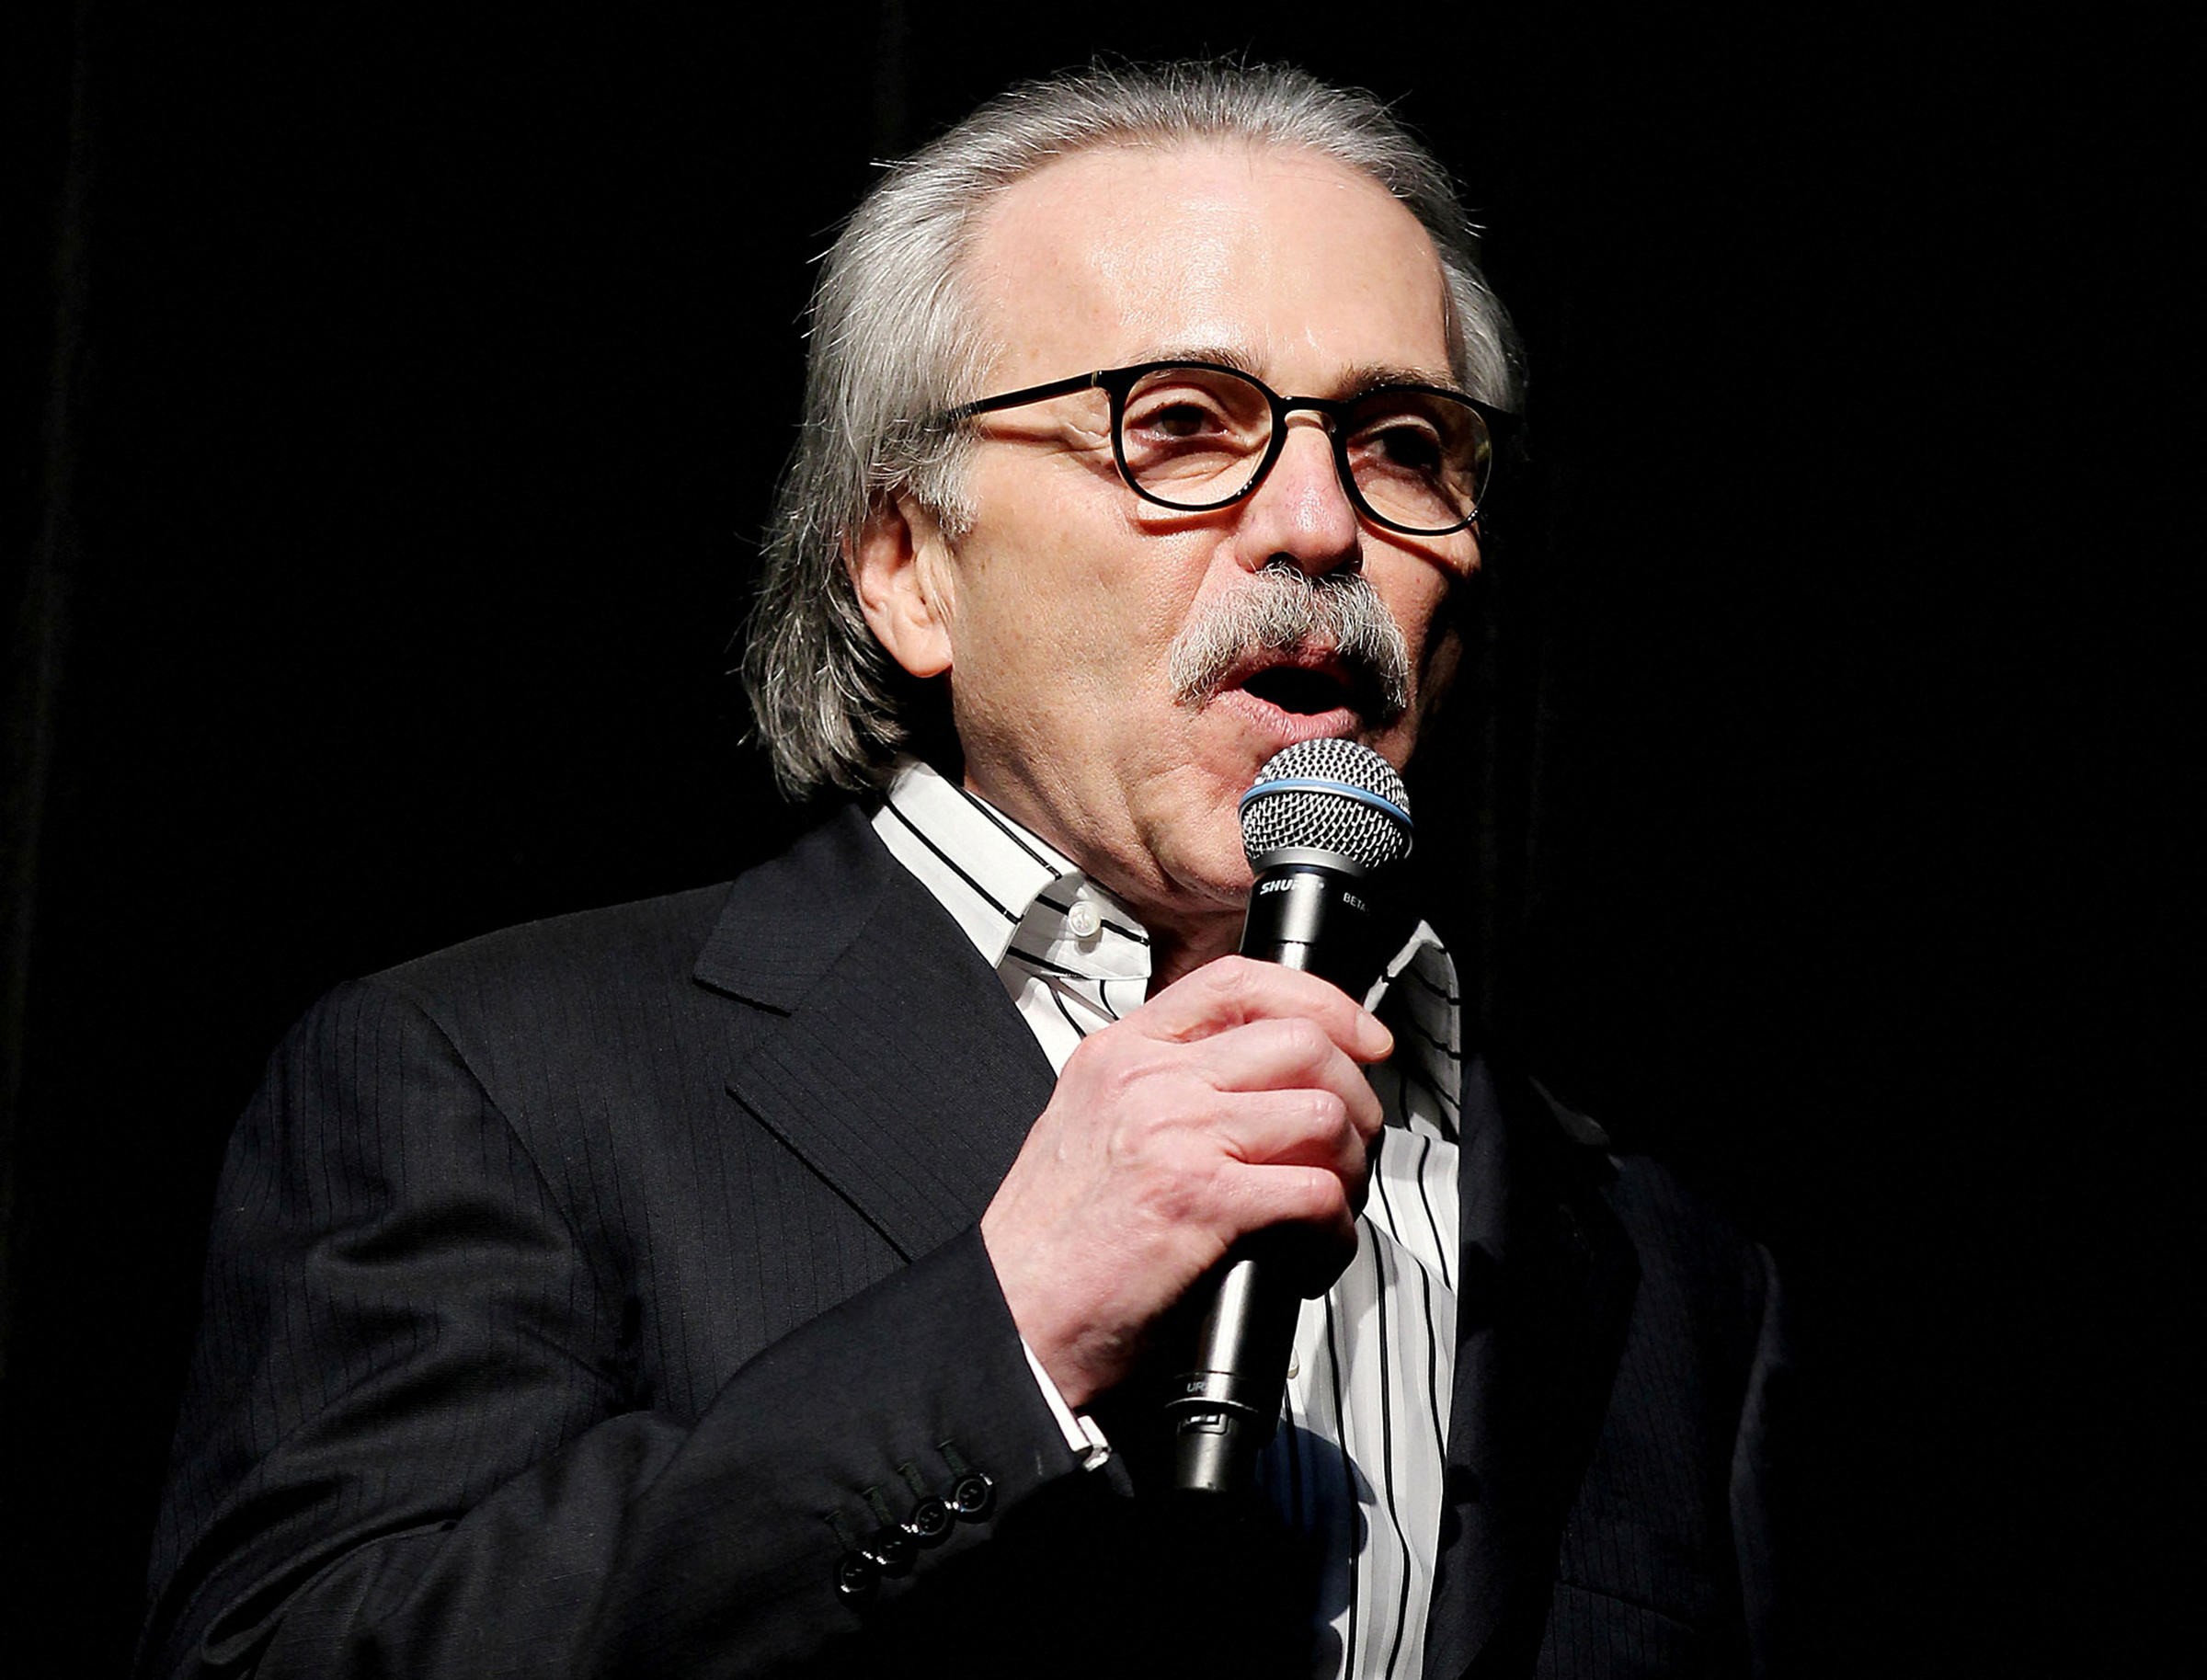 David Pecker, chair and CEO of American Media, speaks at the Shape and Men's Fitness Super Bowl Party in New York City, Jan. 31, 2014.